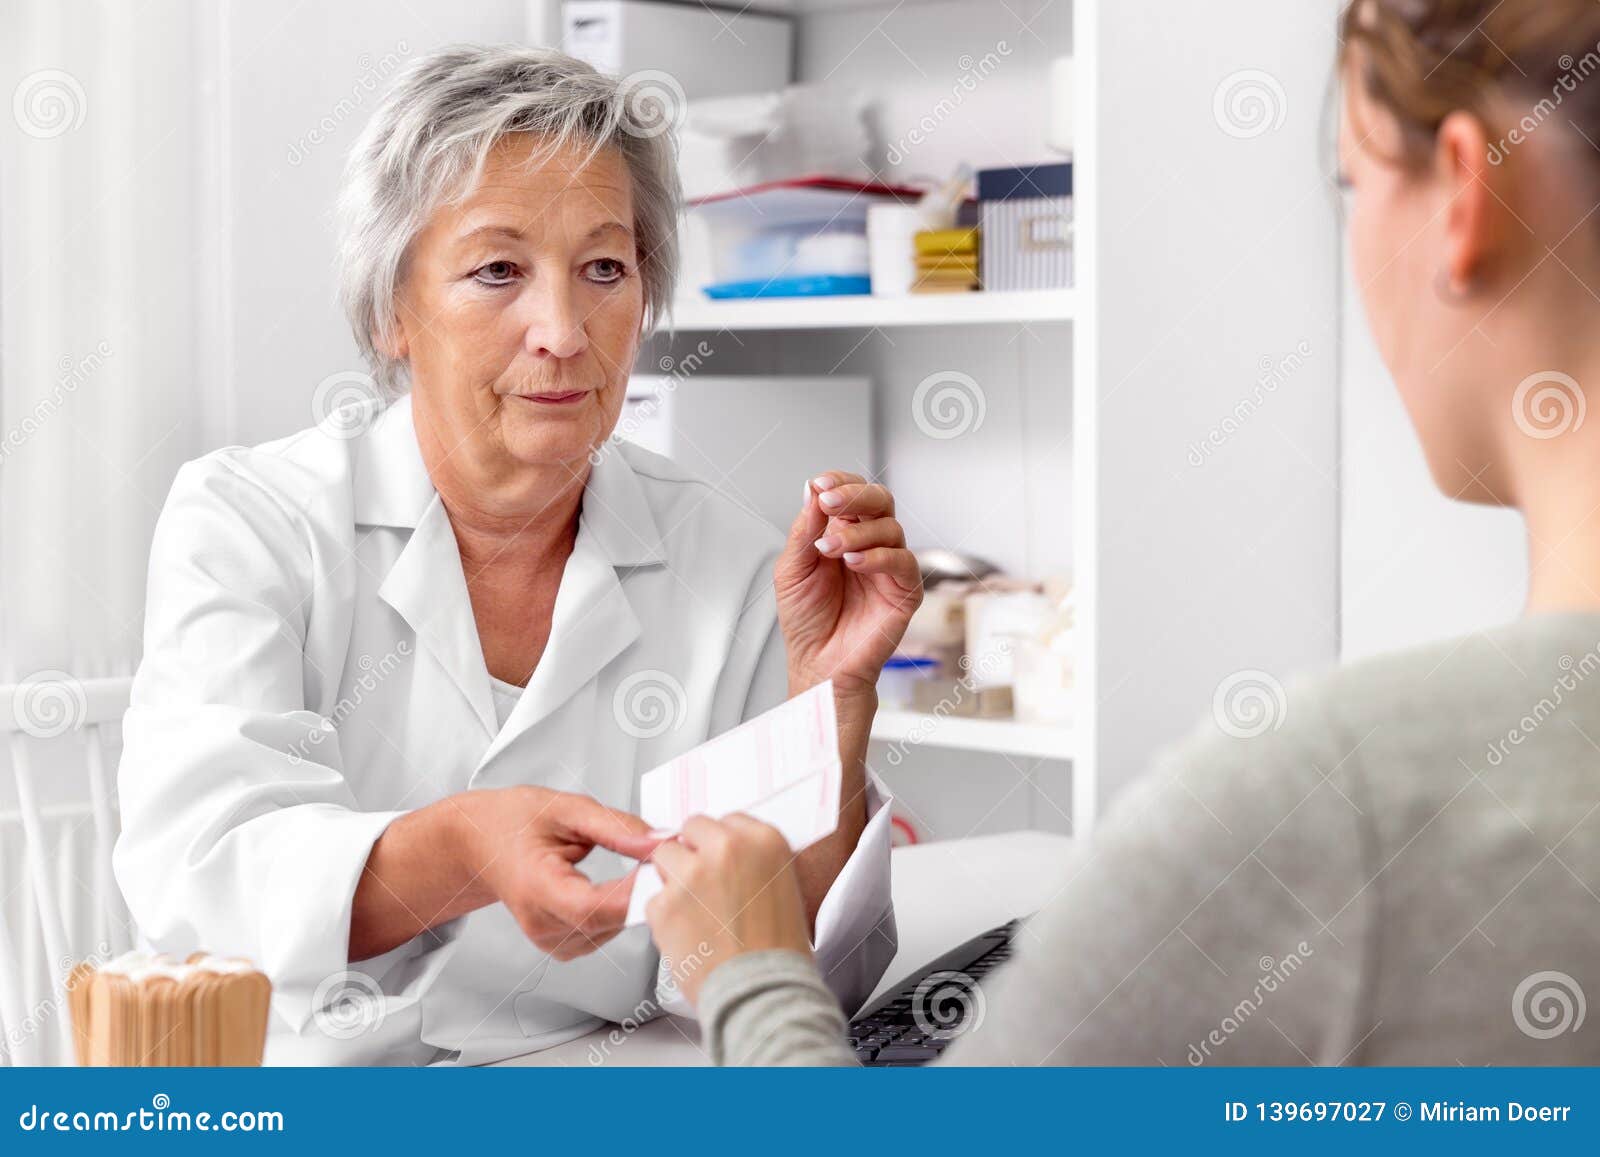 female doctor is giving a medical prescription to a patient, doctorÃÂ´s order